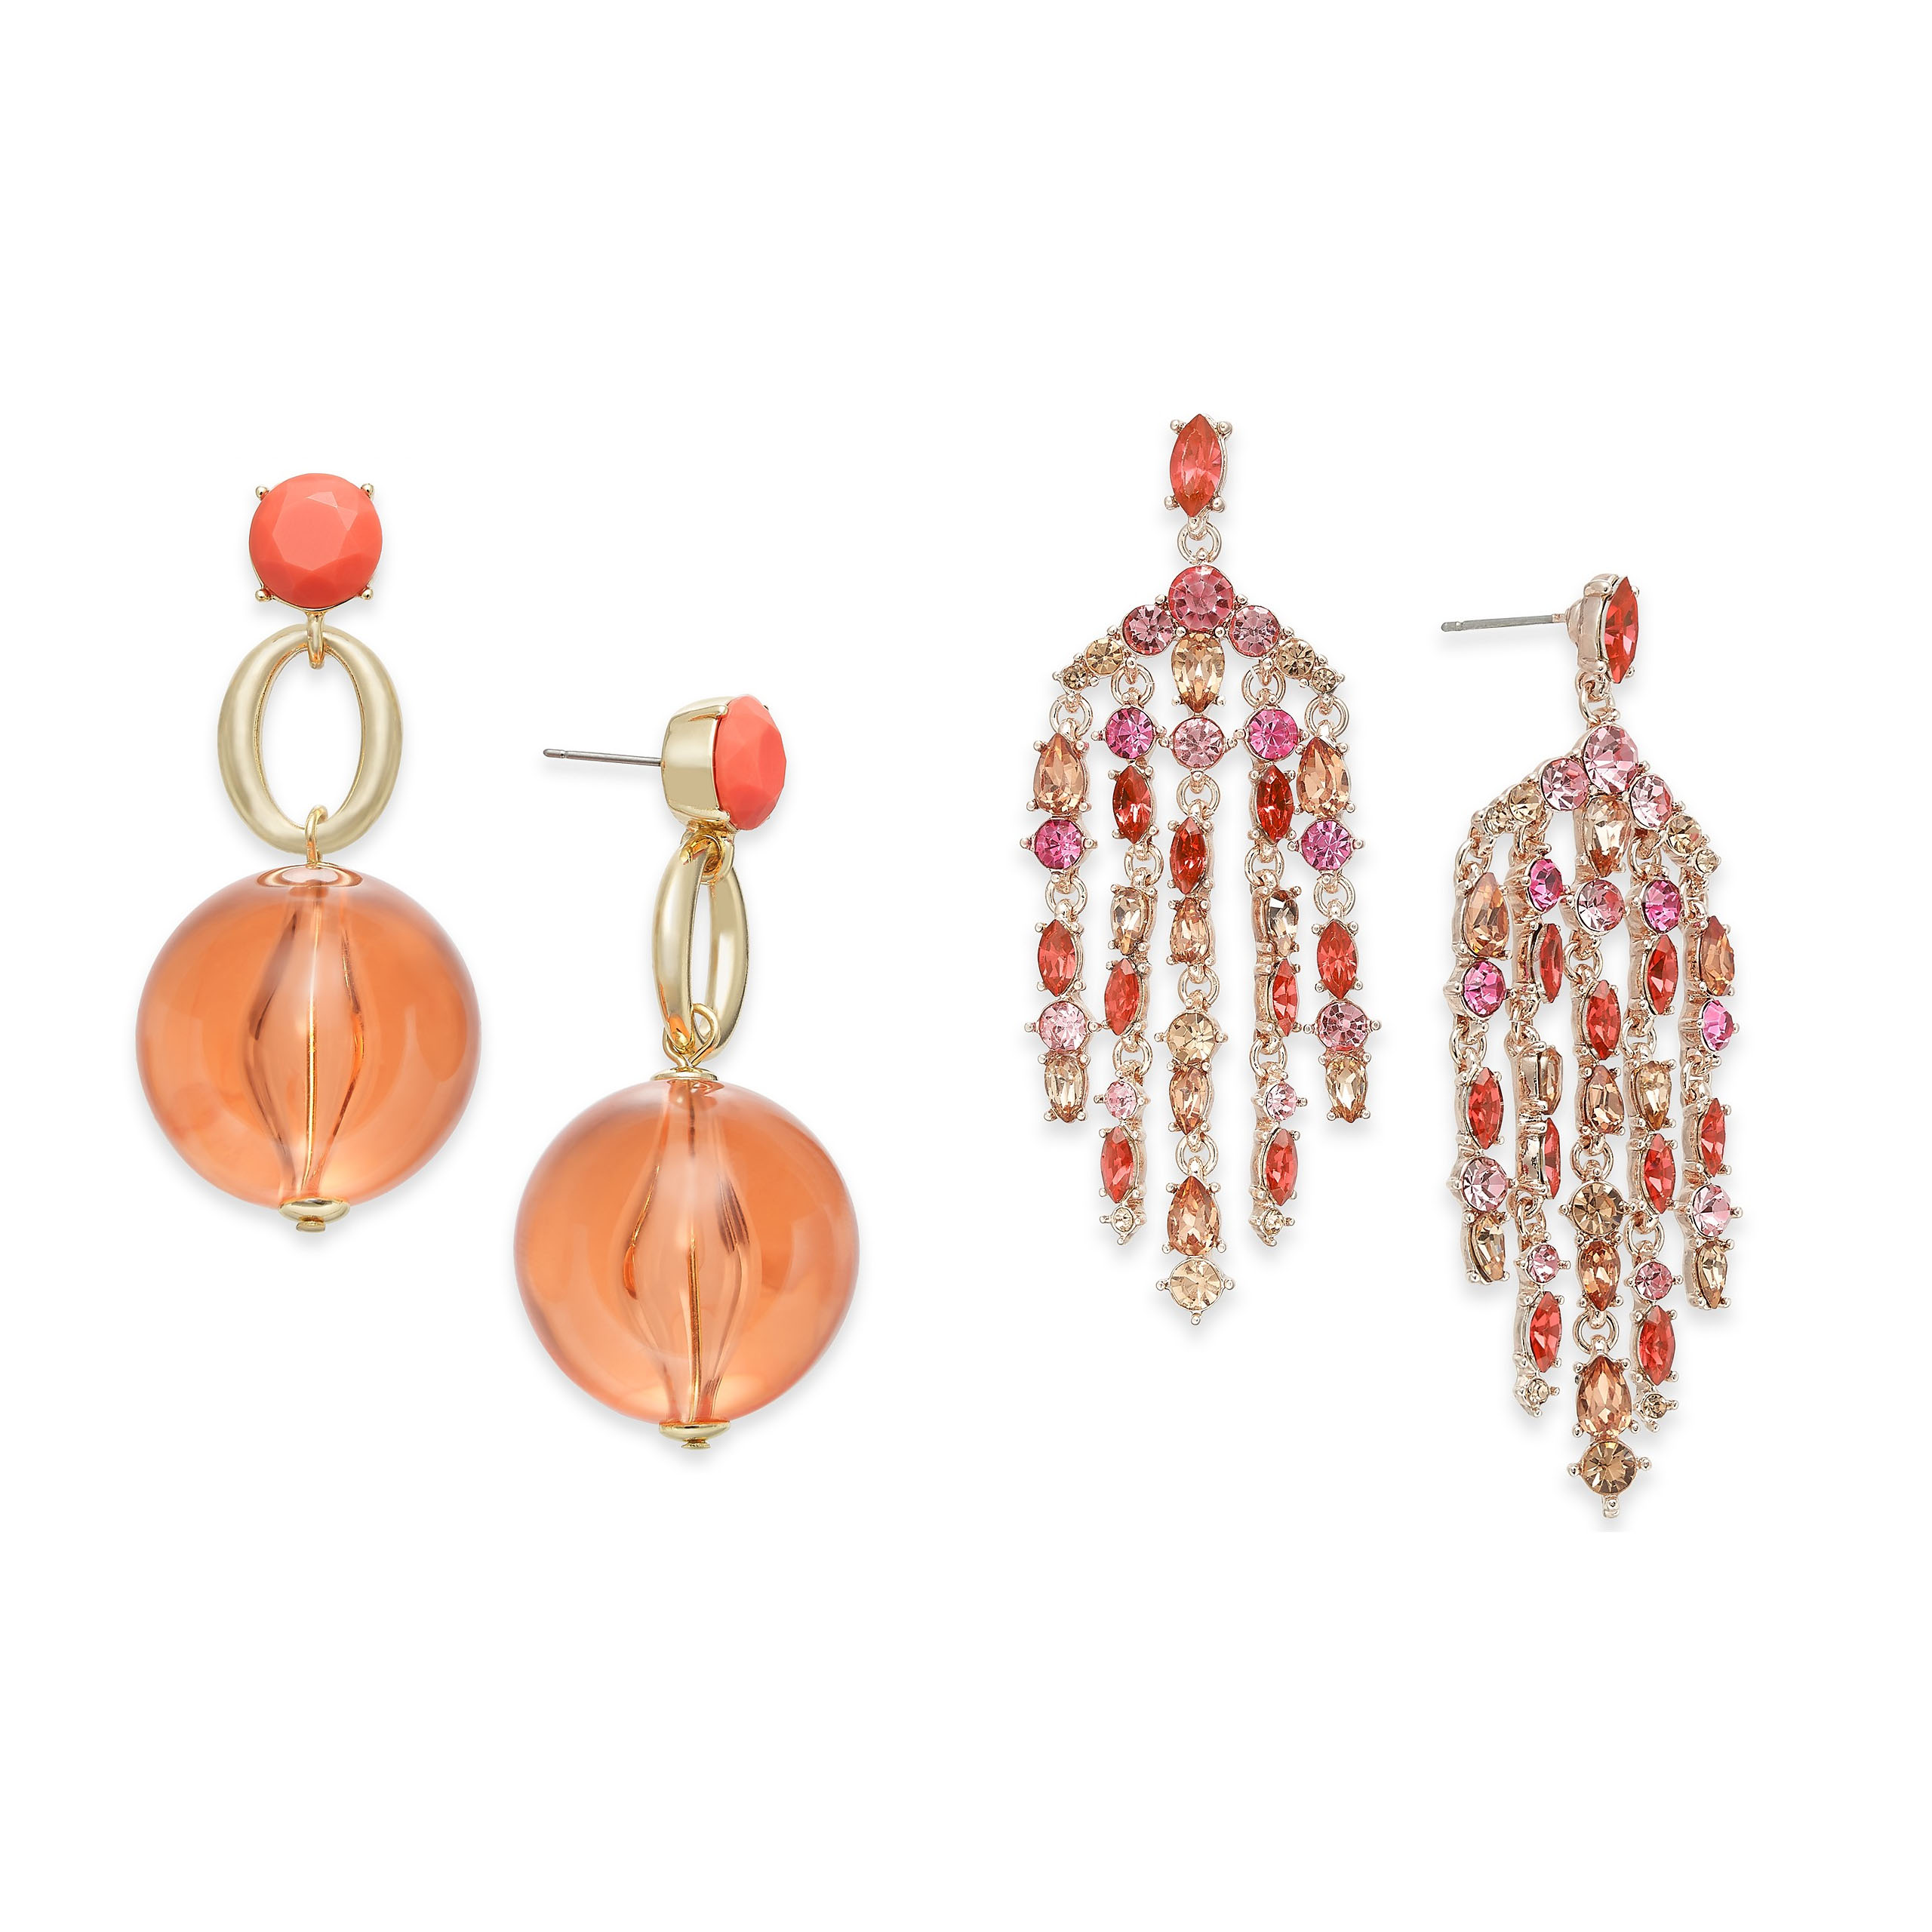 INC International Concepts Gold-Tone Coral Stone & Bead, Rose Gold Stone Chandelier – 2 Pack - image 1 of 1